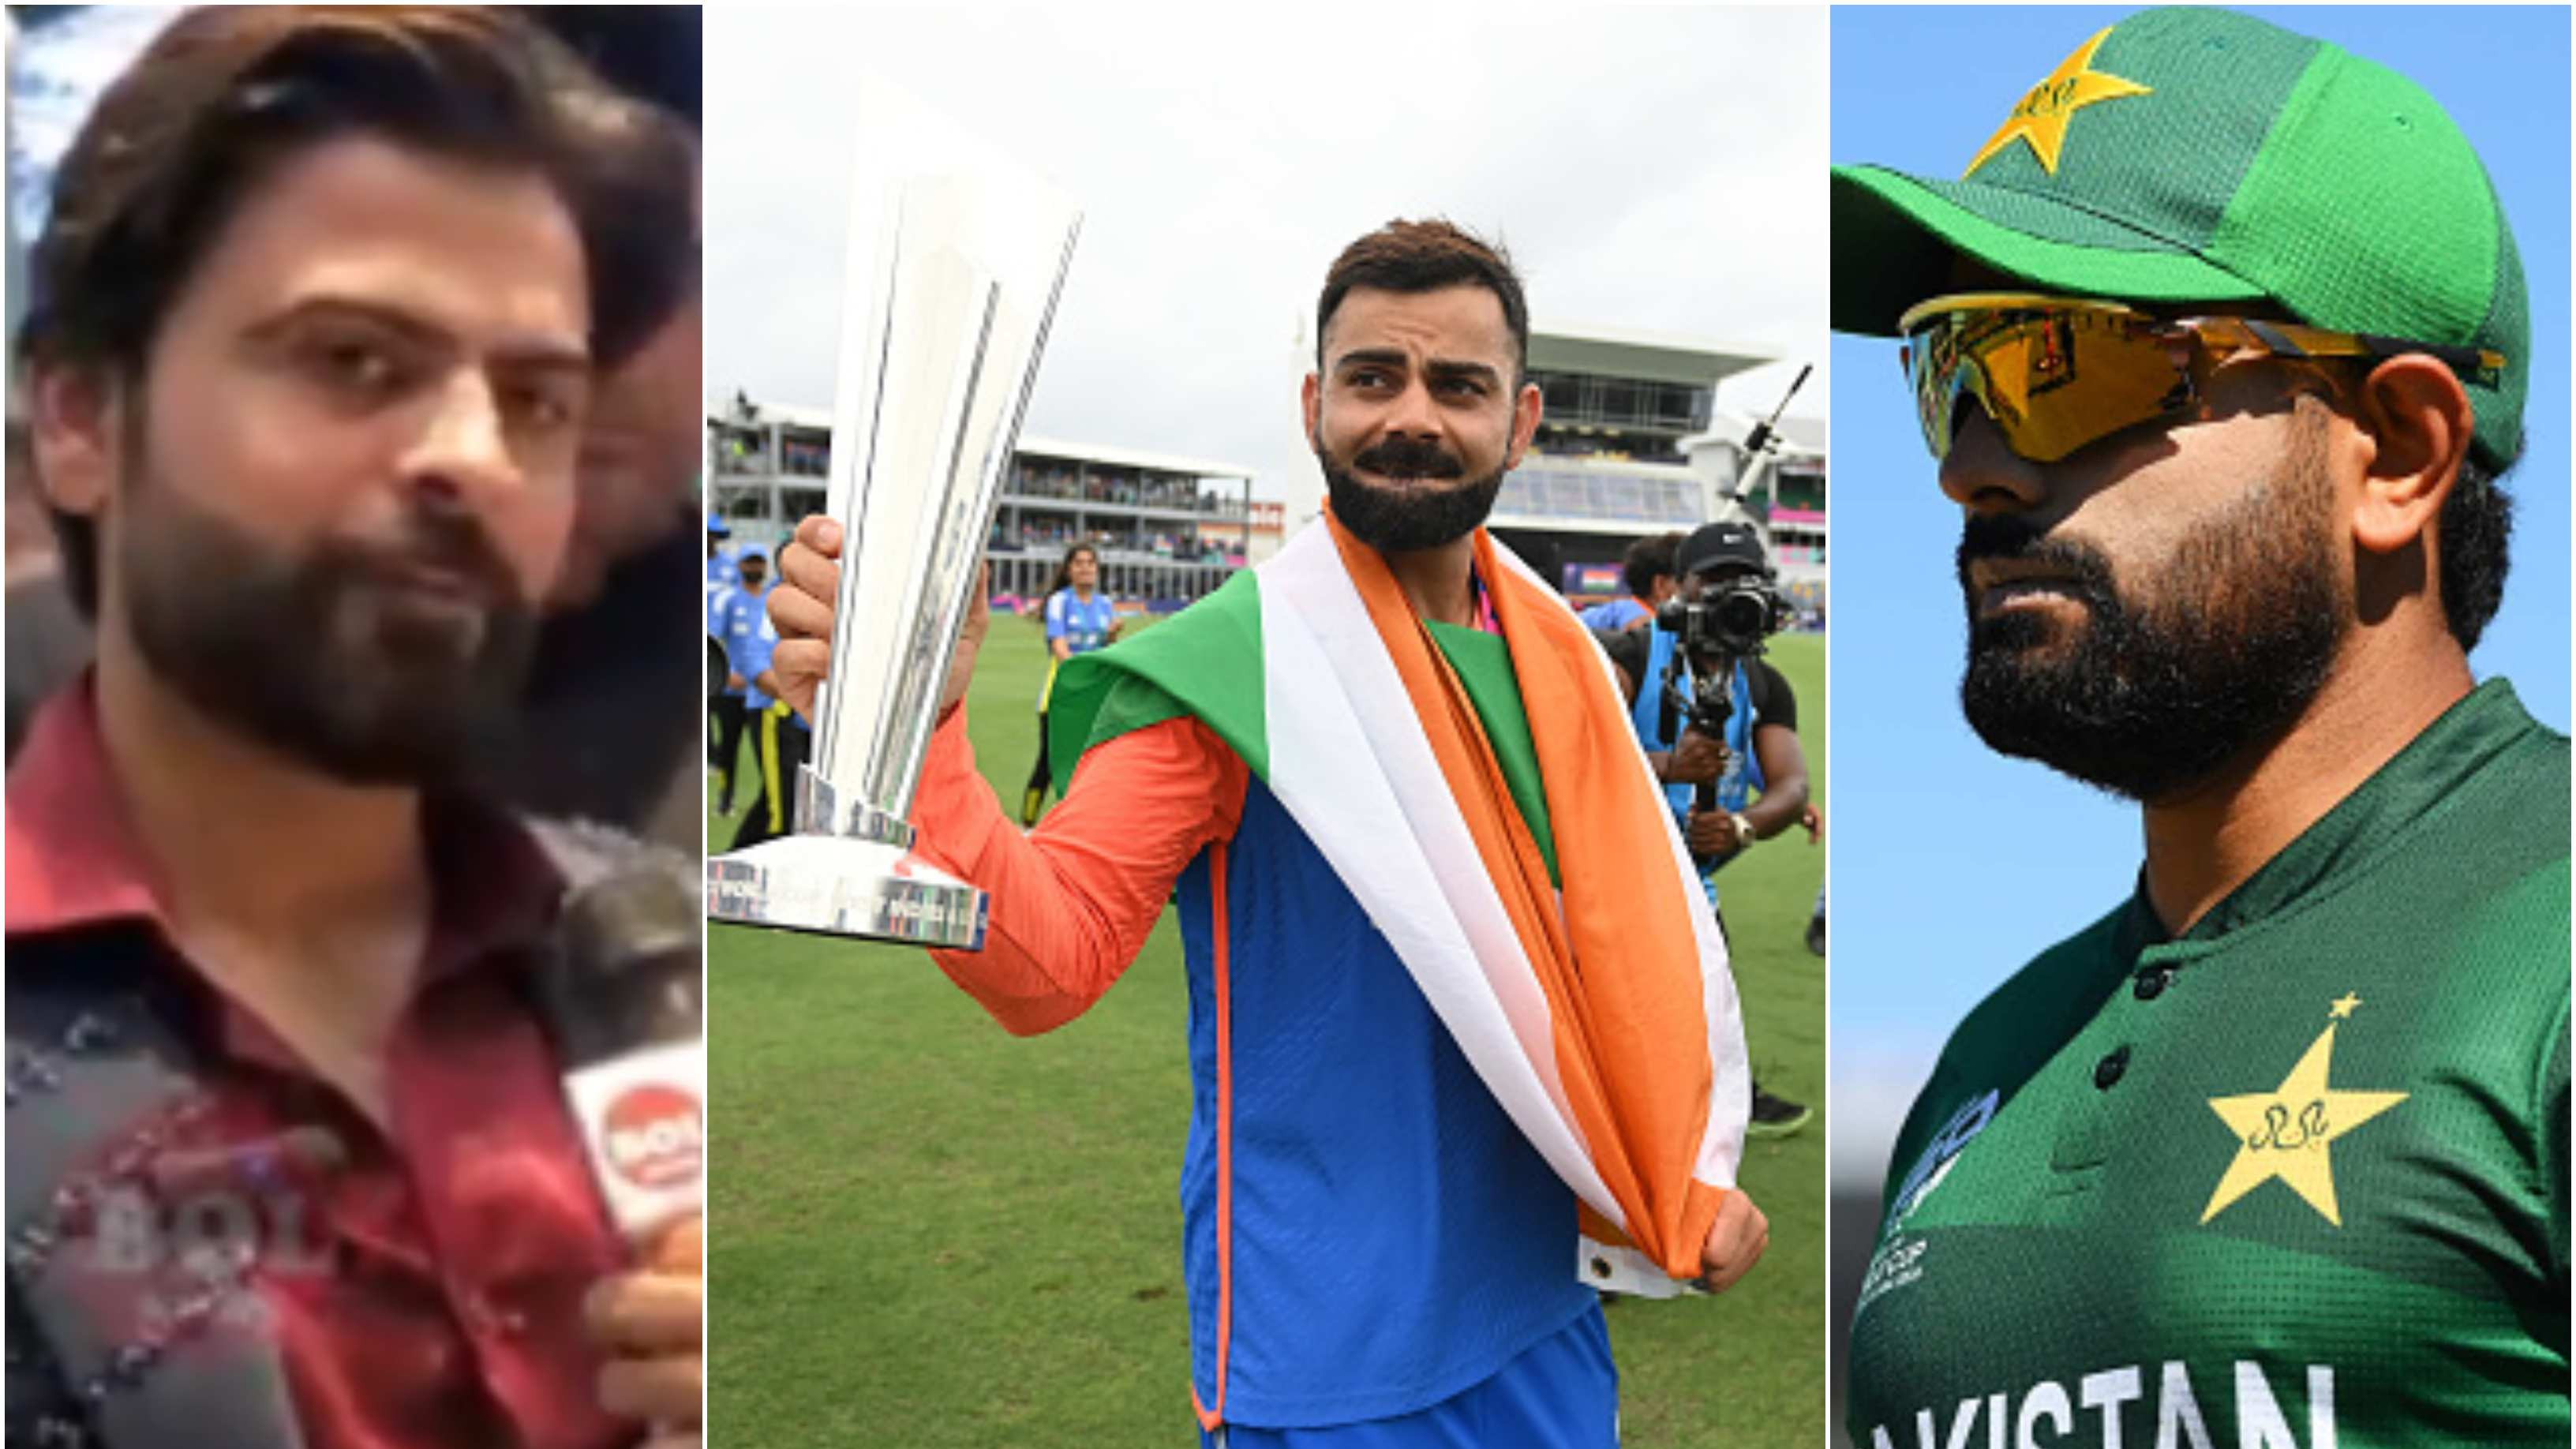 WATCH: Ahmad Shahzad explains why ‘legend’ Virat Kohli shouldn’t be compared to Babar Azam or any other cricketer